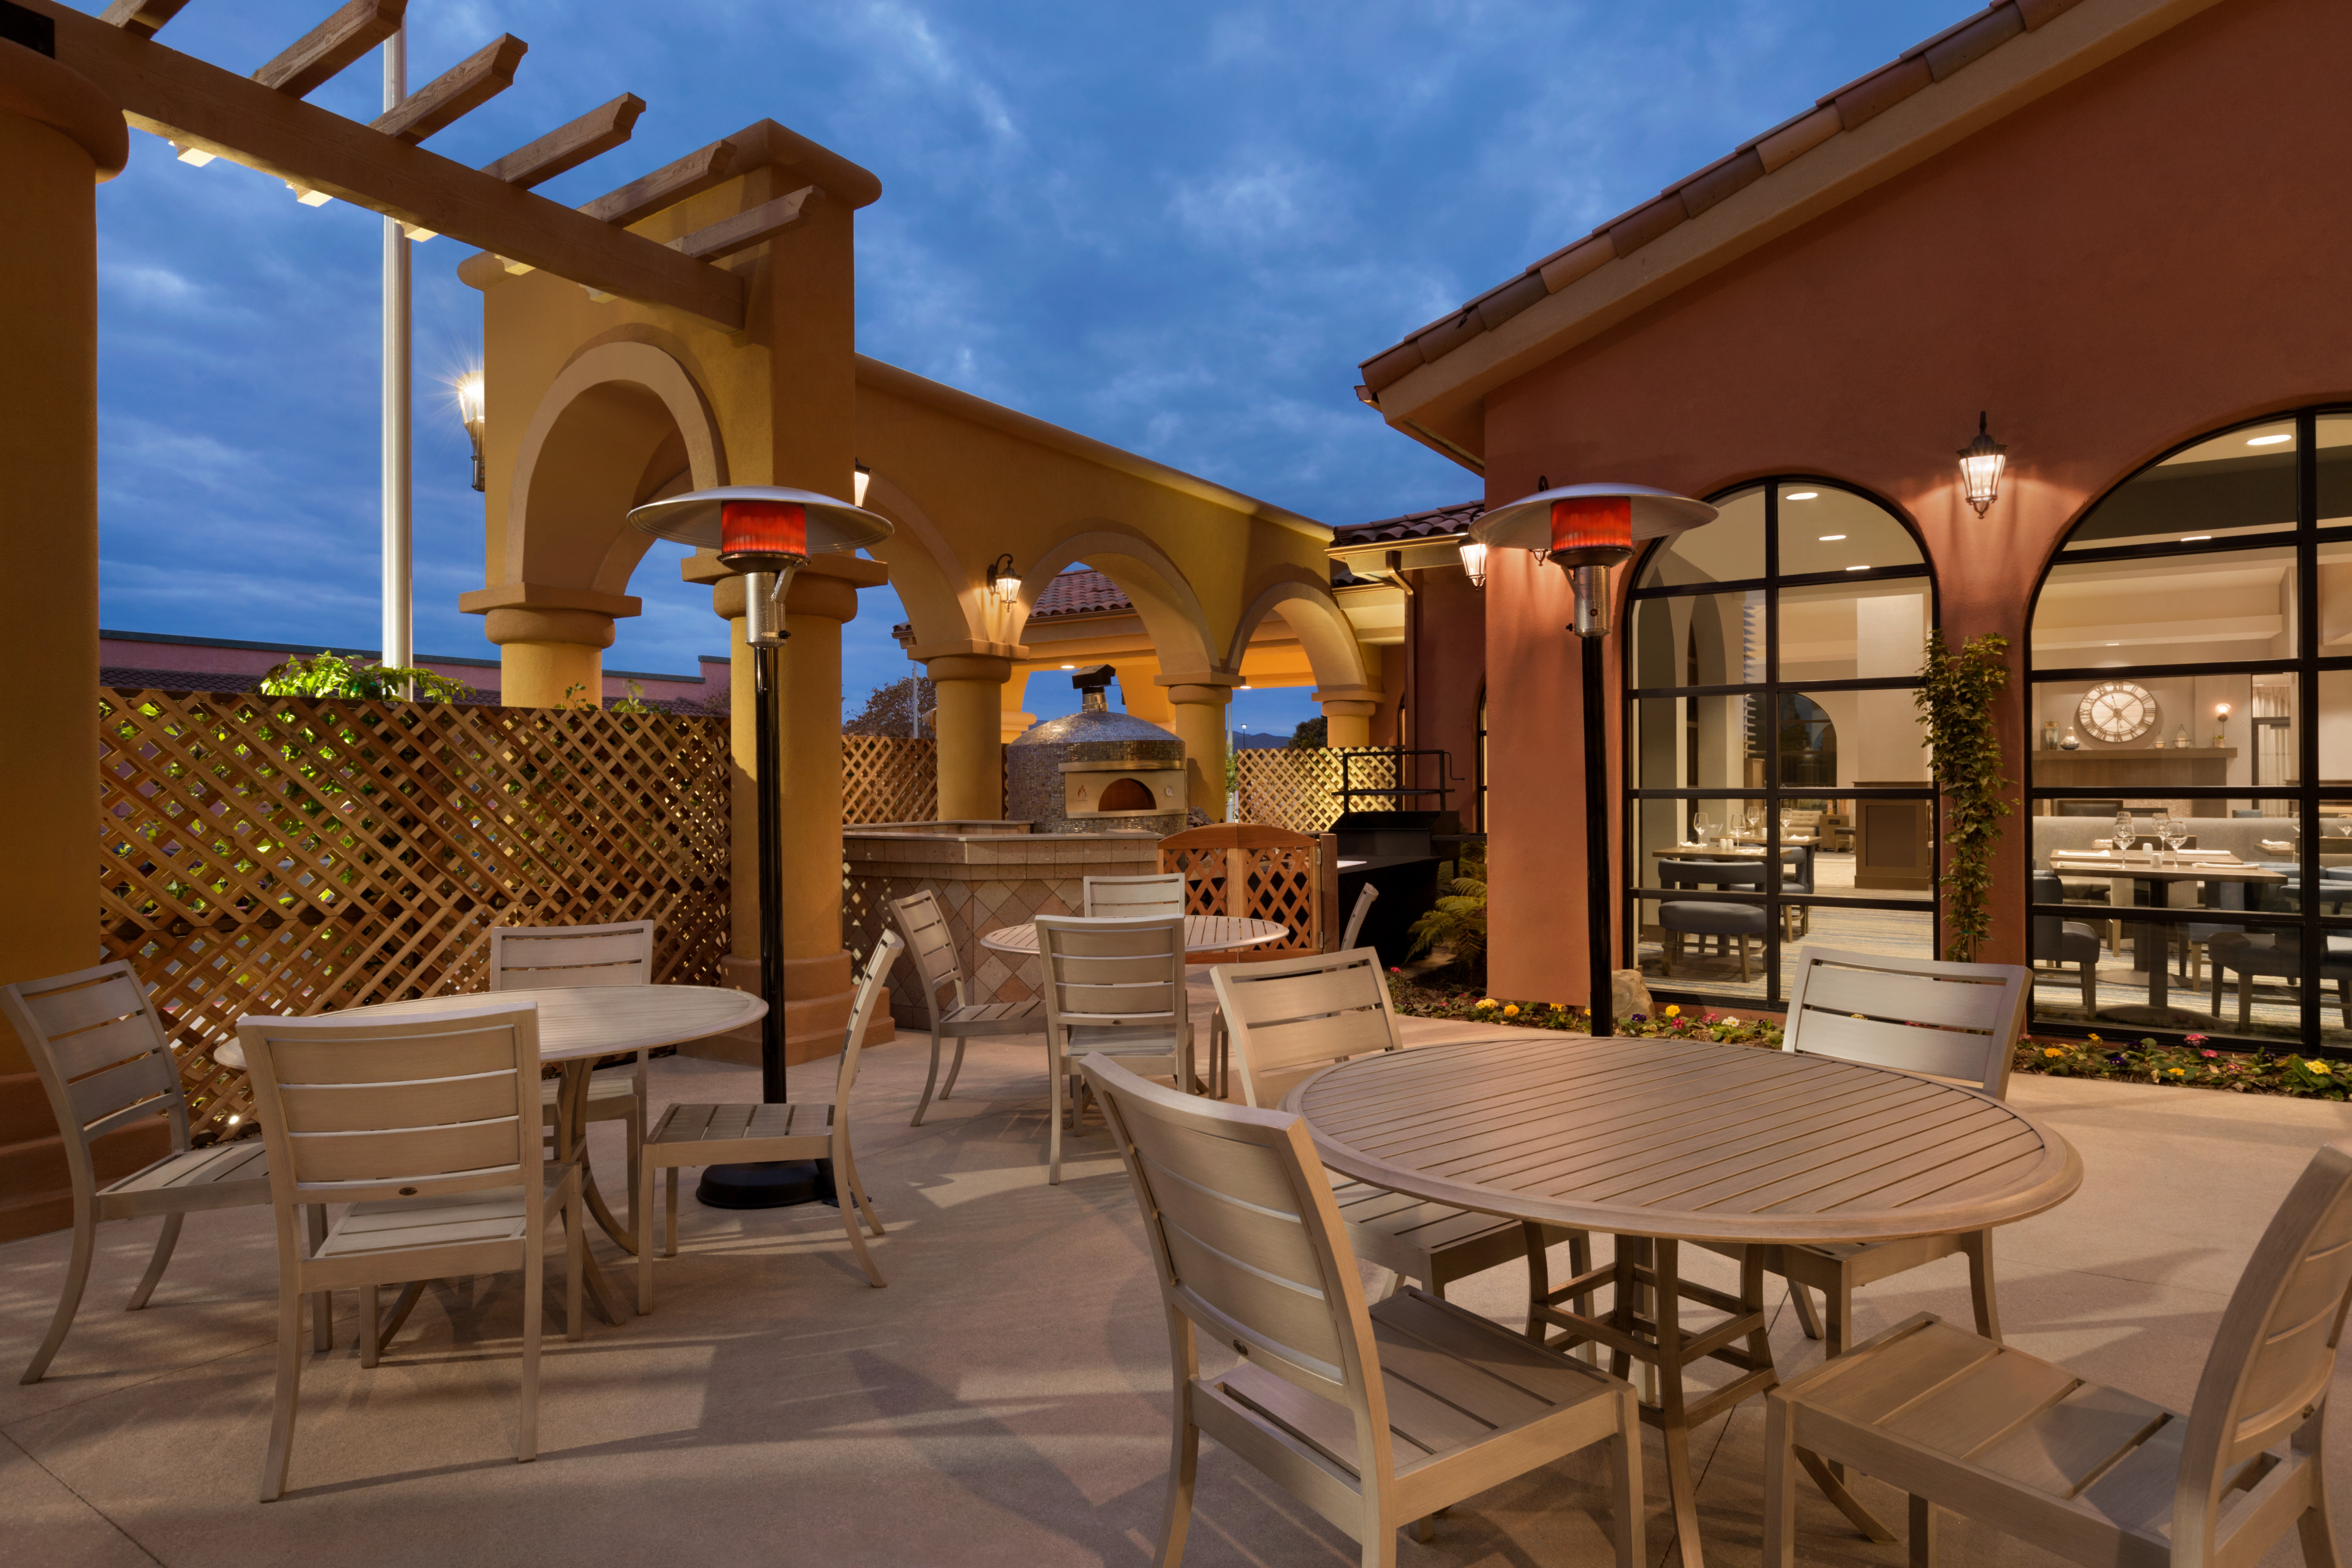 Outdoor Patio Seating Area with Chairs and Tables at Night